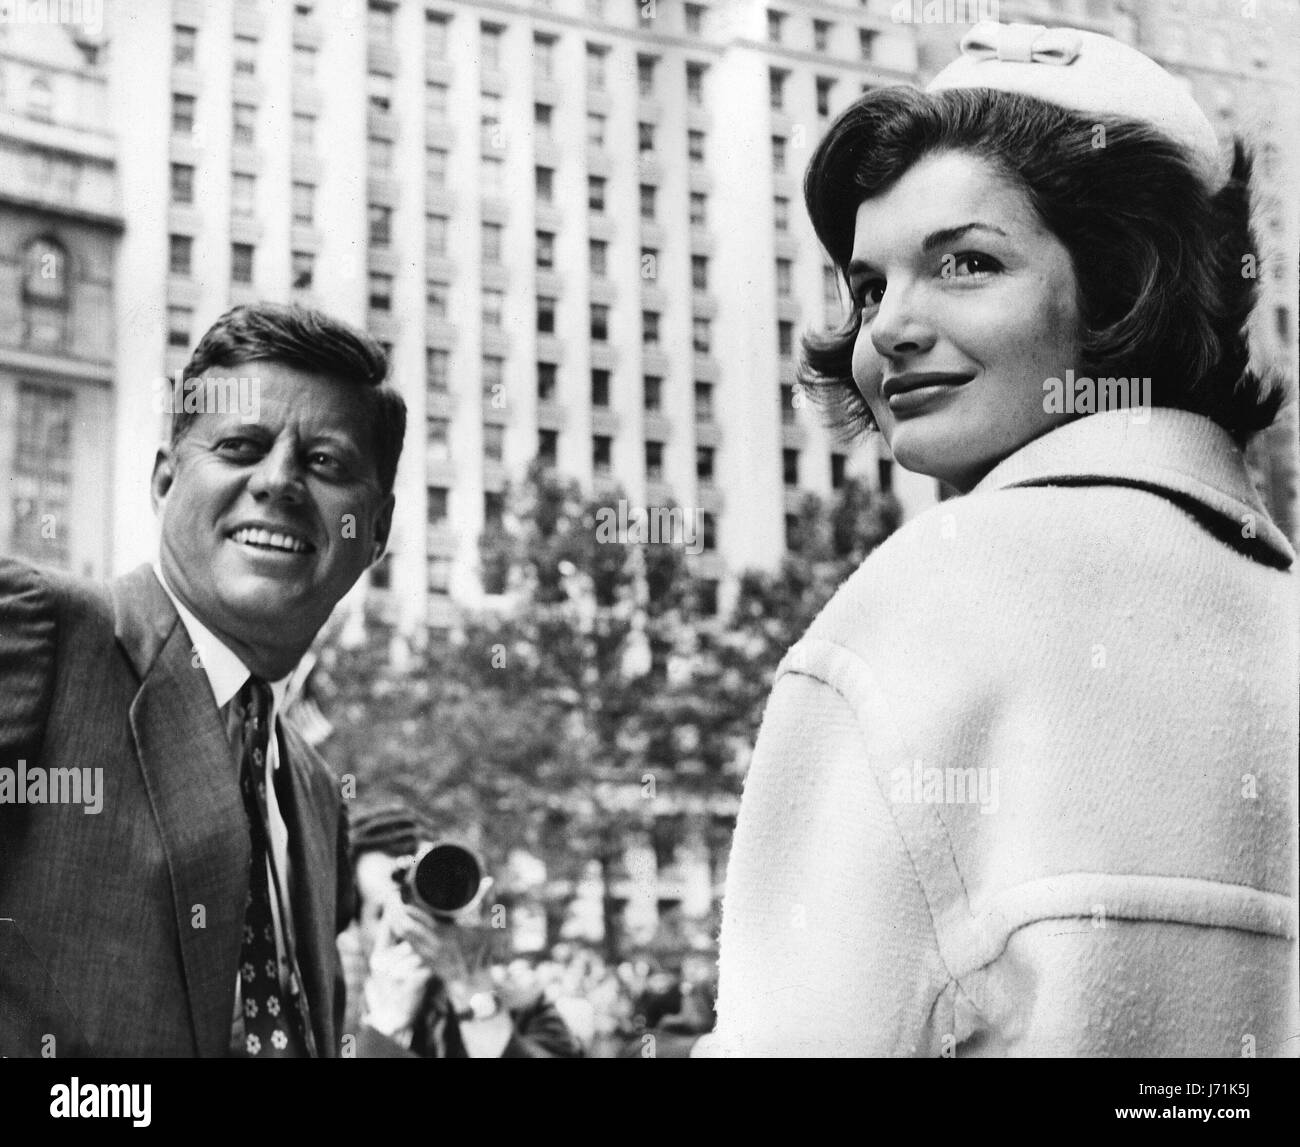 John F. Kennedy, the nation's 35th President, would have turned 100 years old on May 29, 2017. With the centennial anniversary of John F. Kennedy's birth, the former president's legacy is being celebrated across the nation. PICTURED: Oct. 12, 1961 - New York, NY, U.S. - JOHN F. KENNEDY was the 35th President of the United States, as well as the youngest. PICTURED: President Kennedy with First Lady JACKIE KENNEDY at a Broadway Ticker Tape Parade. Credit: KEYSTONE Pictures USA/ZUMAPRESS.com/Alamy Live News Stock Photo